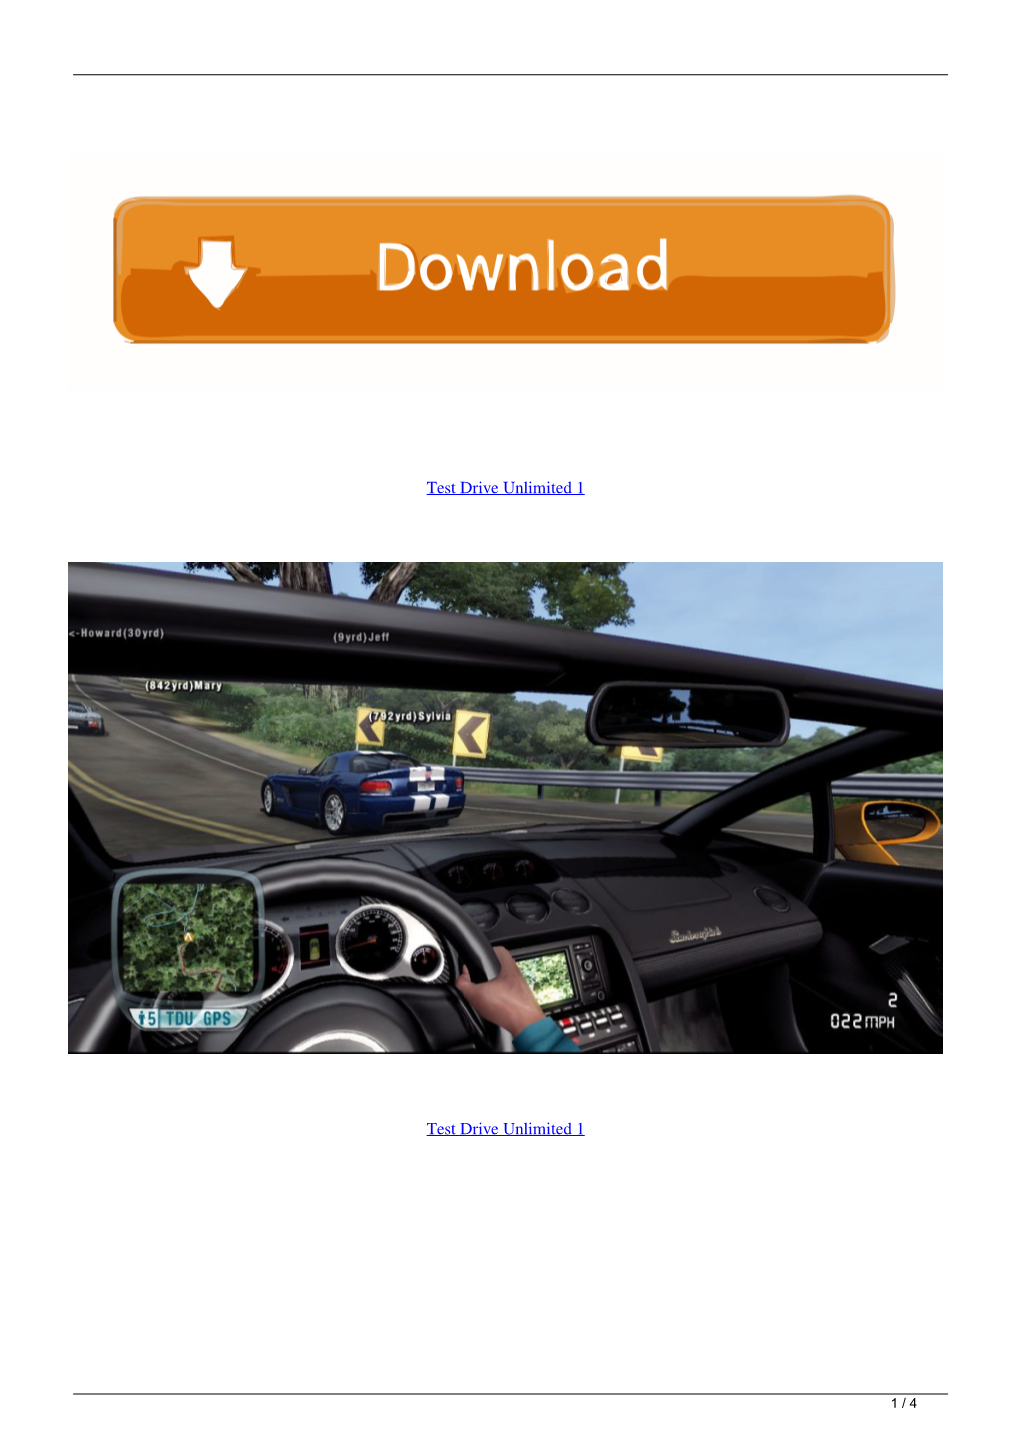 Test Drive Unlimited 1